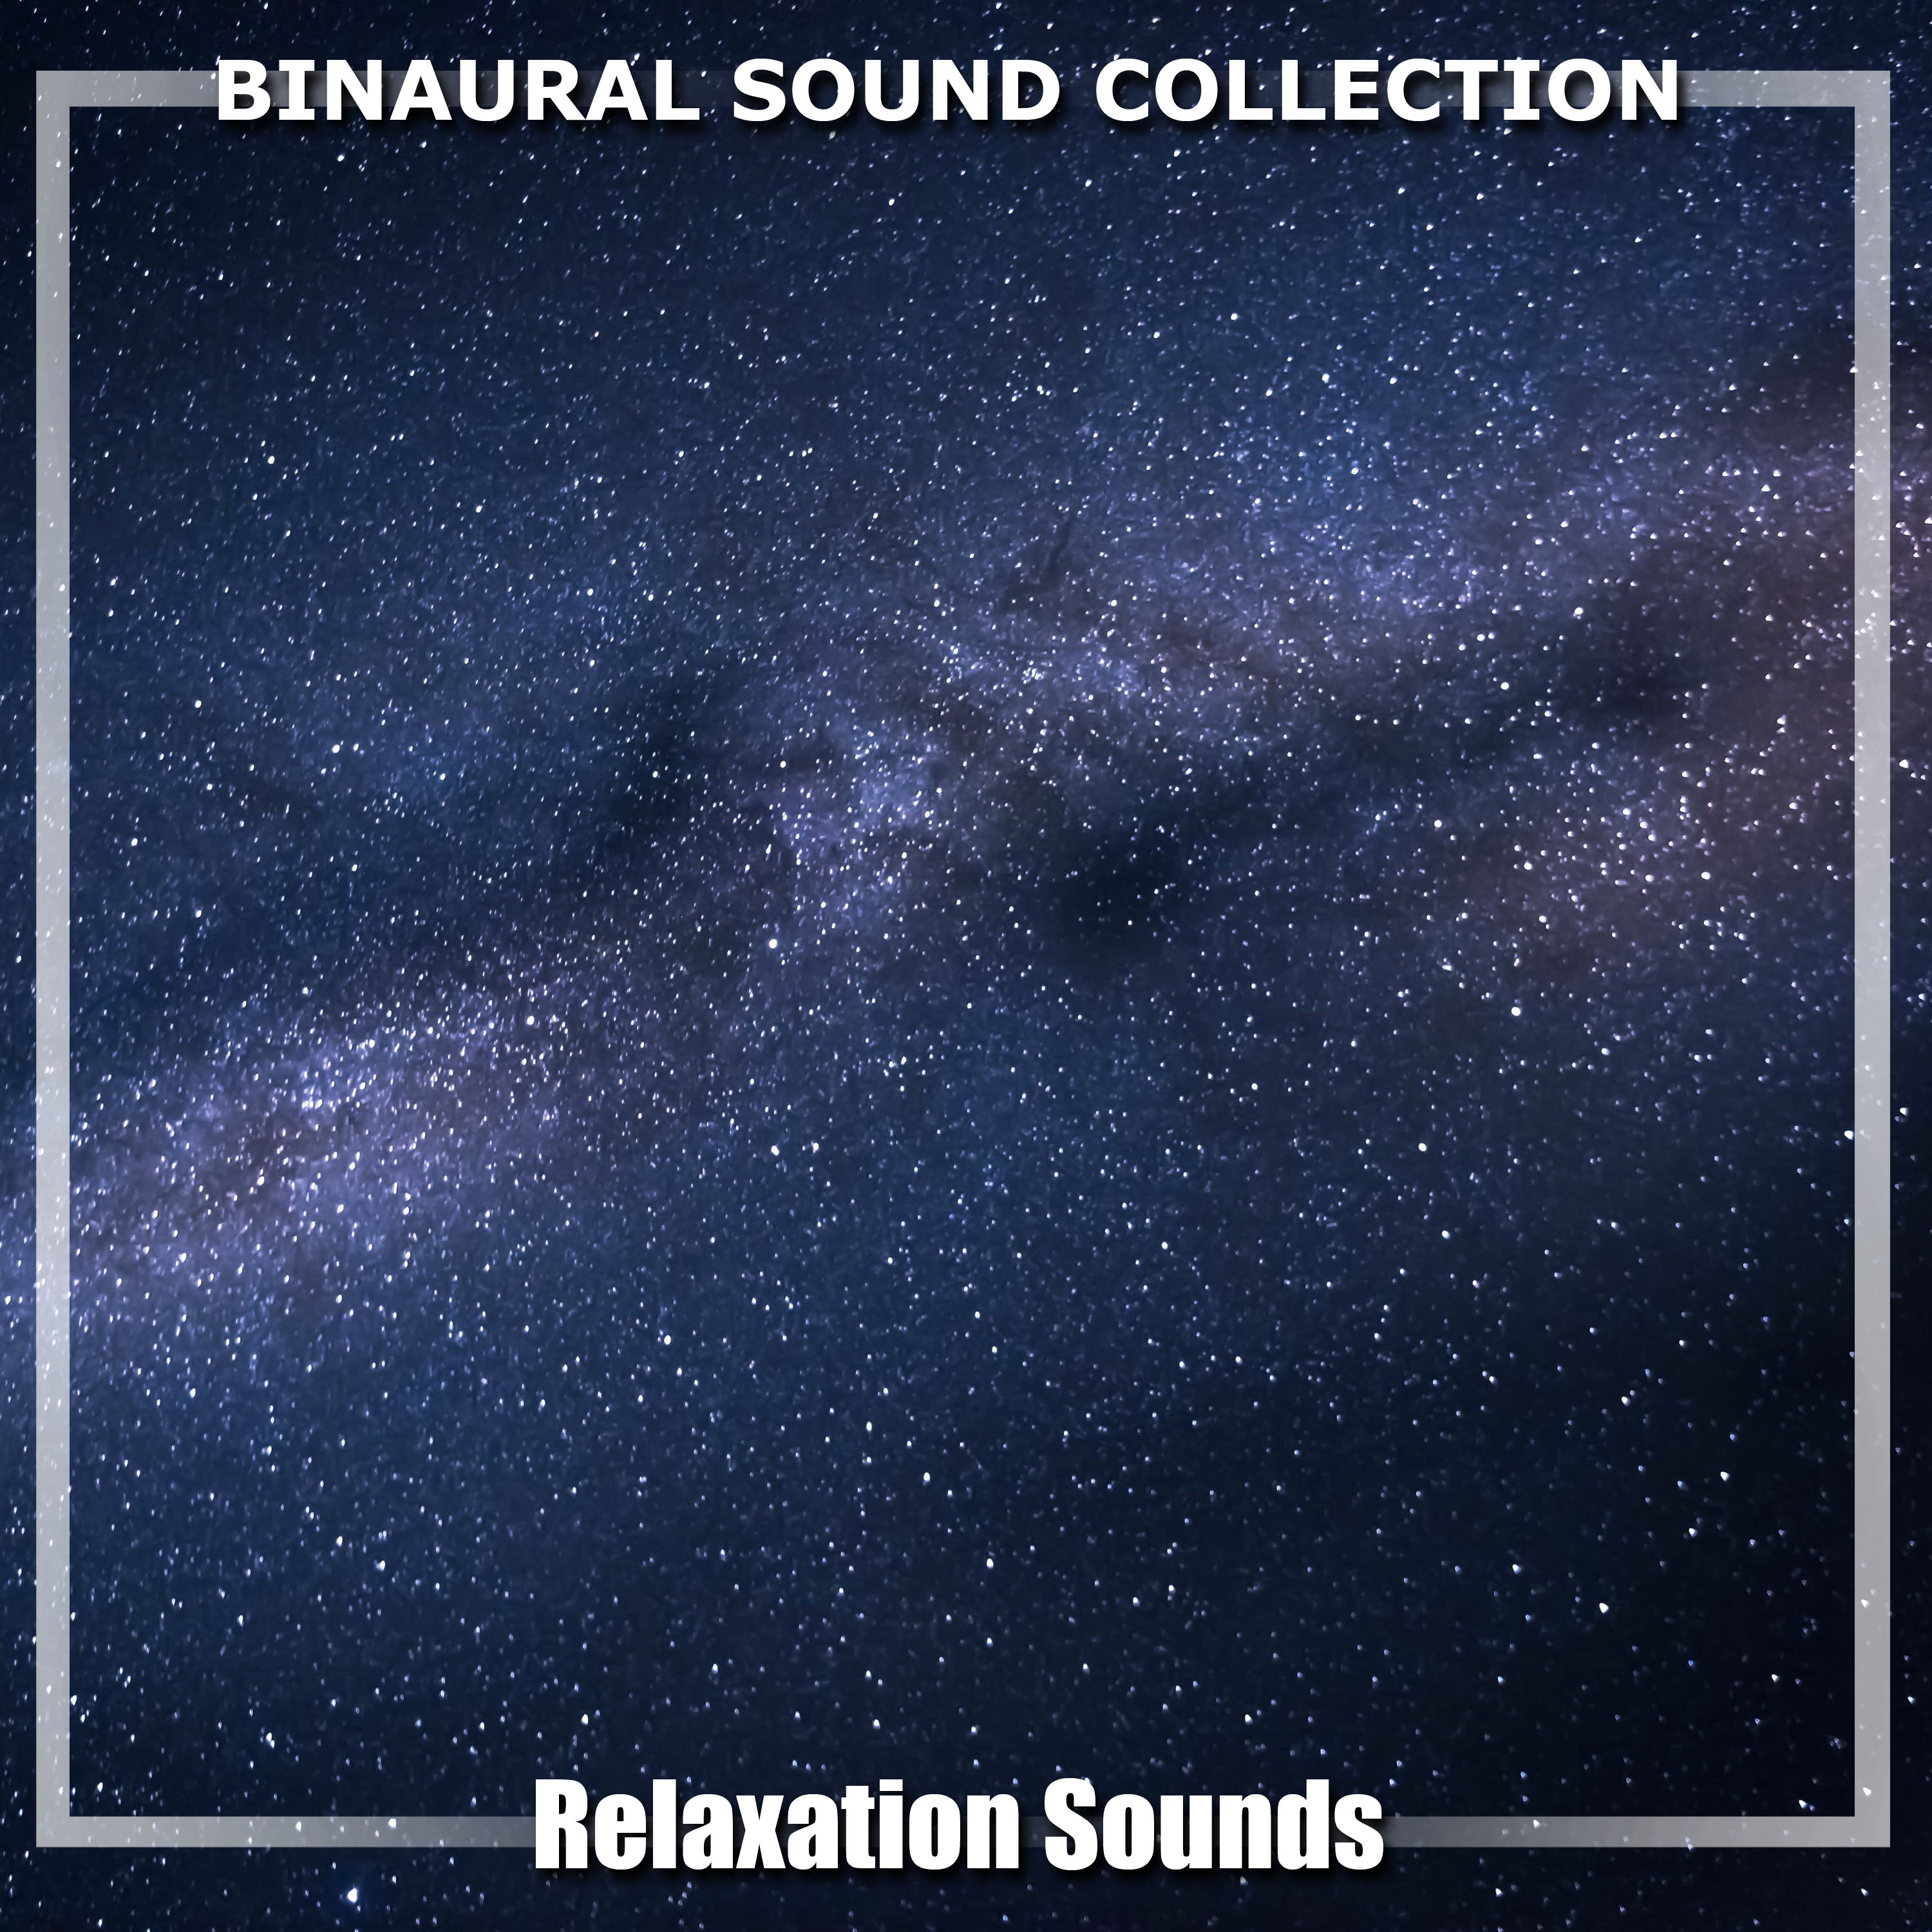 2018 A Binaural Sound Collection: Relaxation Sounds